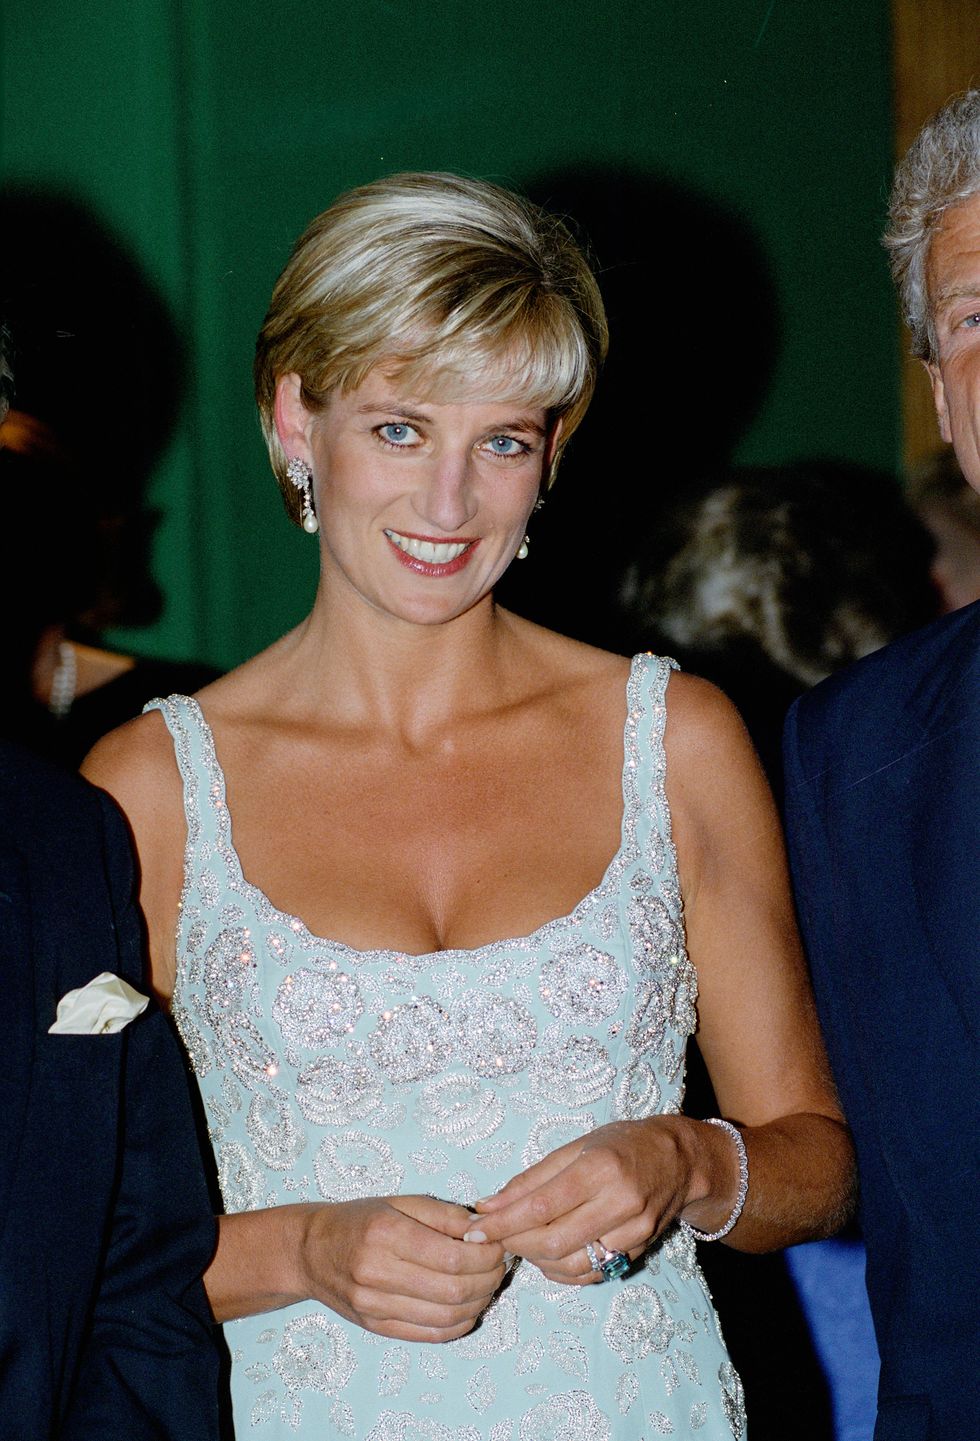 Diana, Princess of Wales wears an embroidered cocktail dress